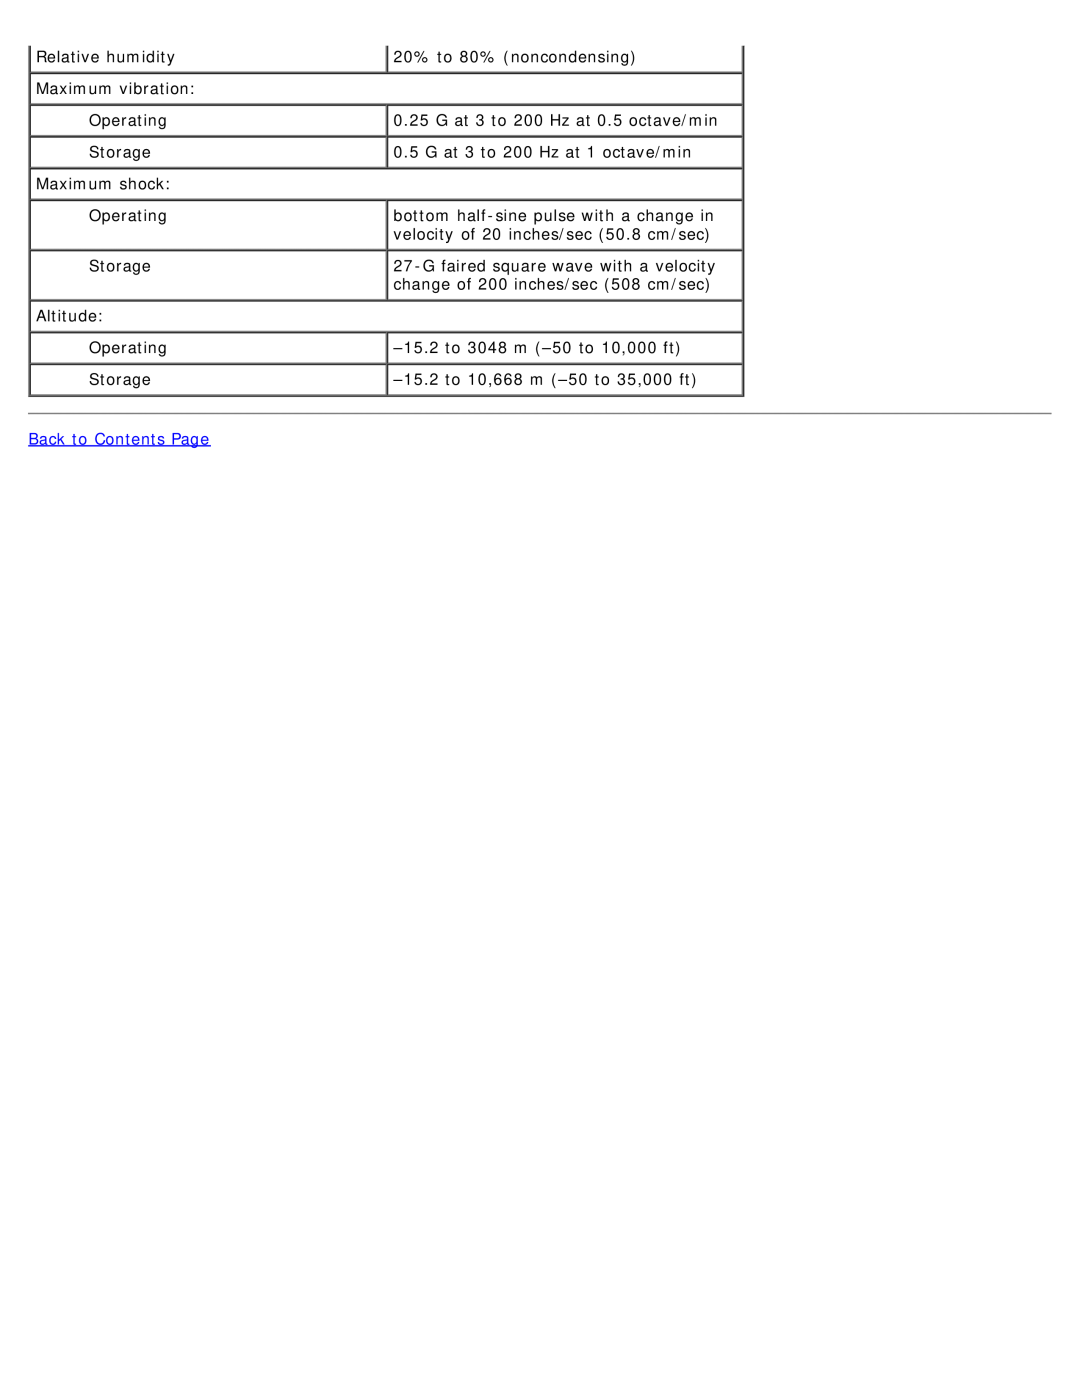 Dell 710 H2C, DCDO service manual Back to Contents Page 